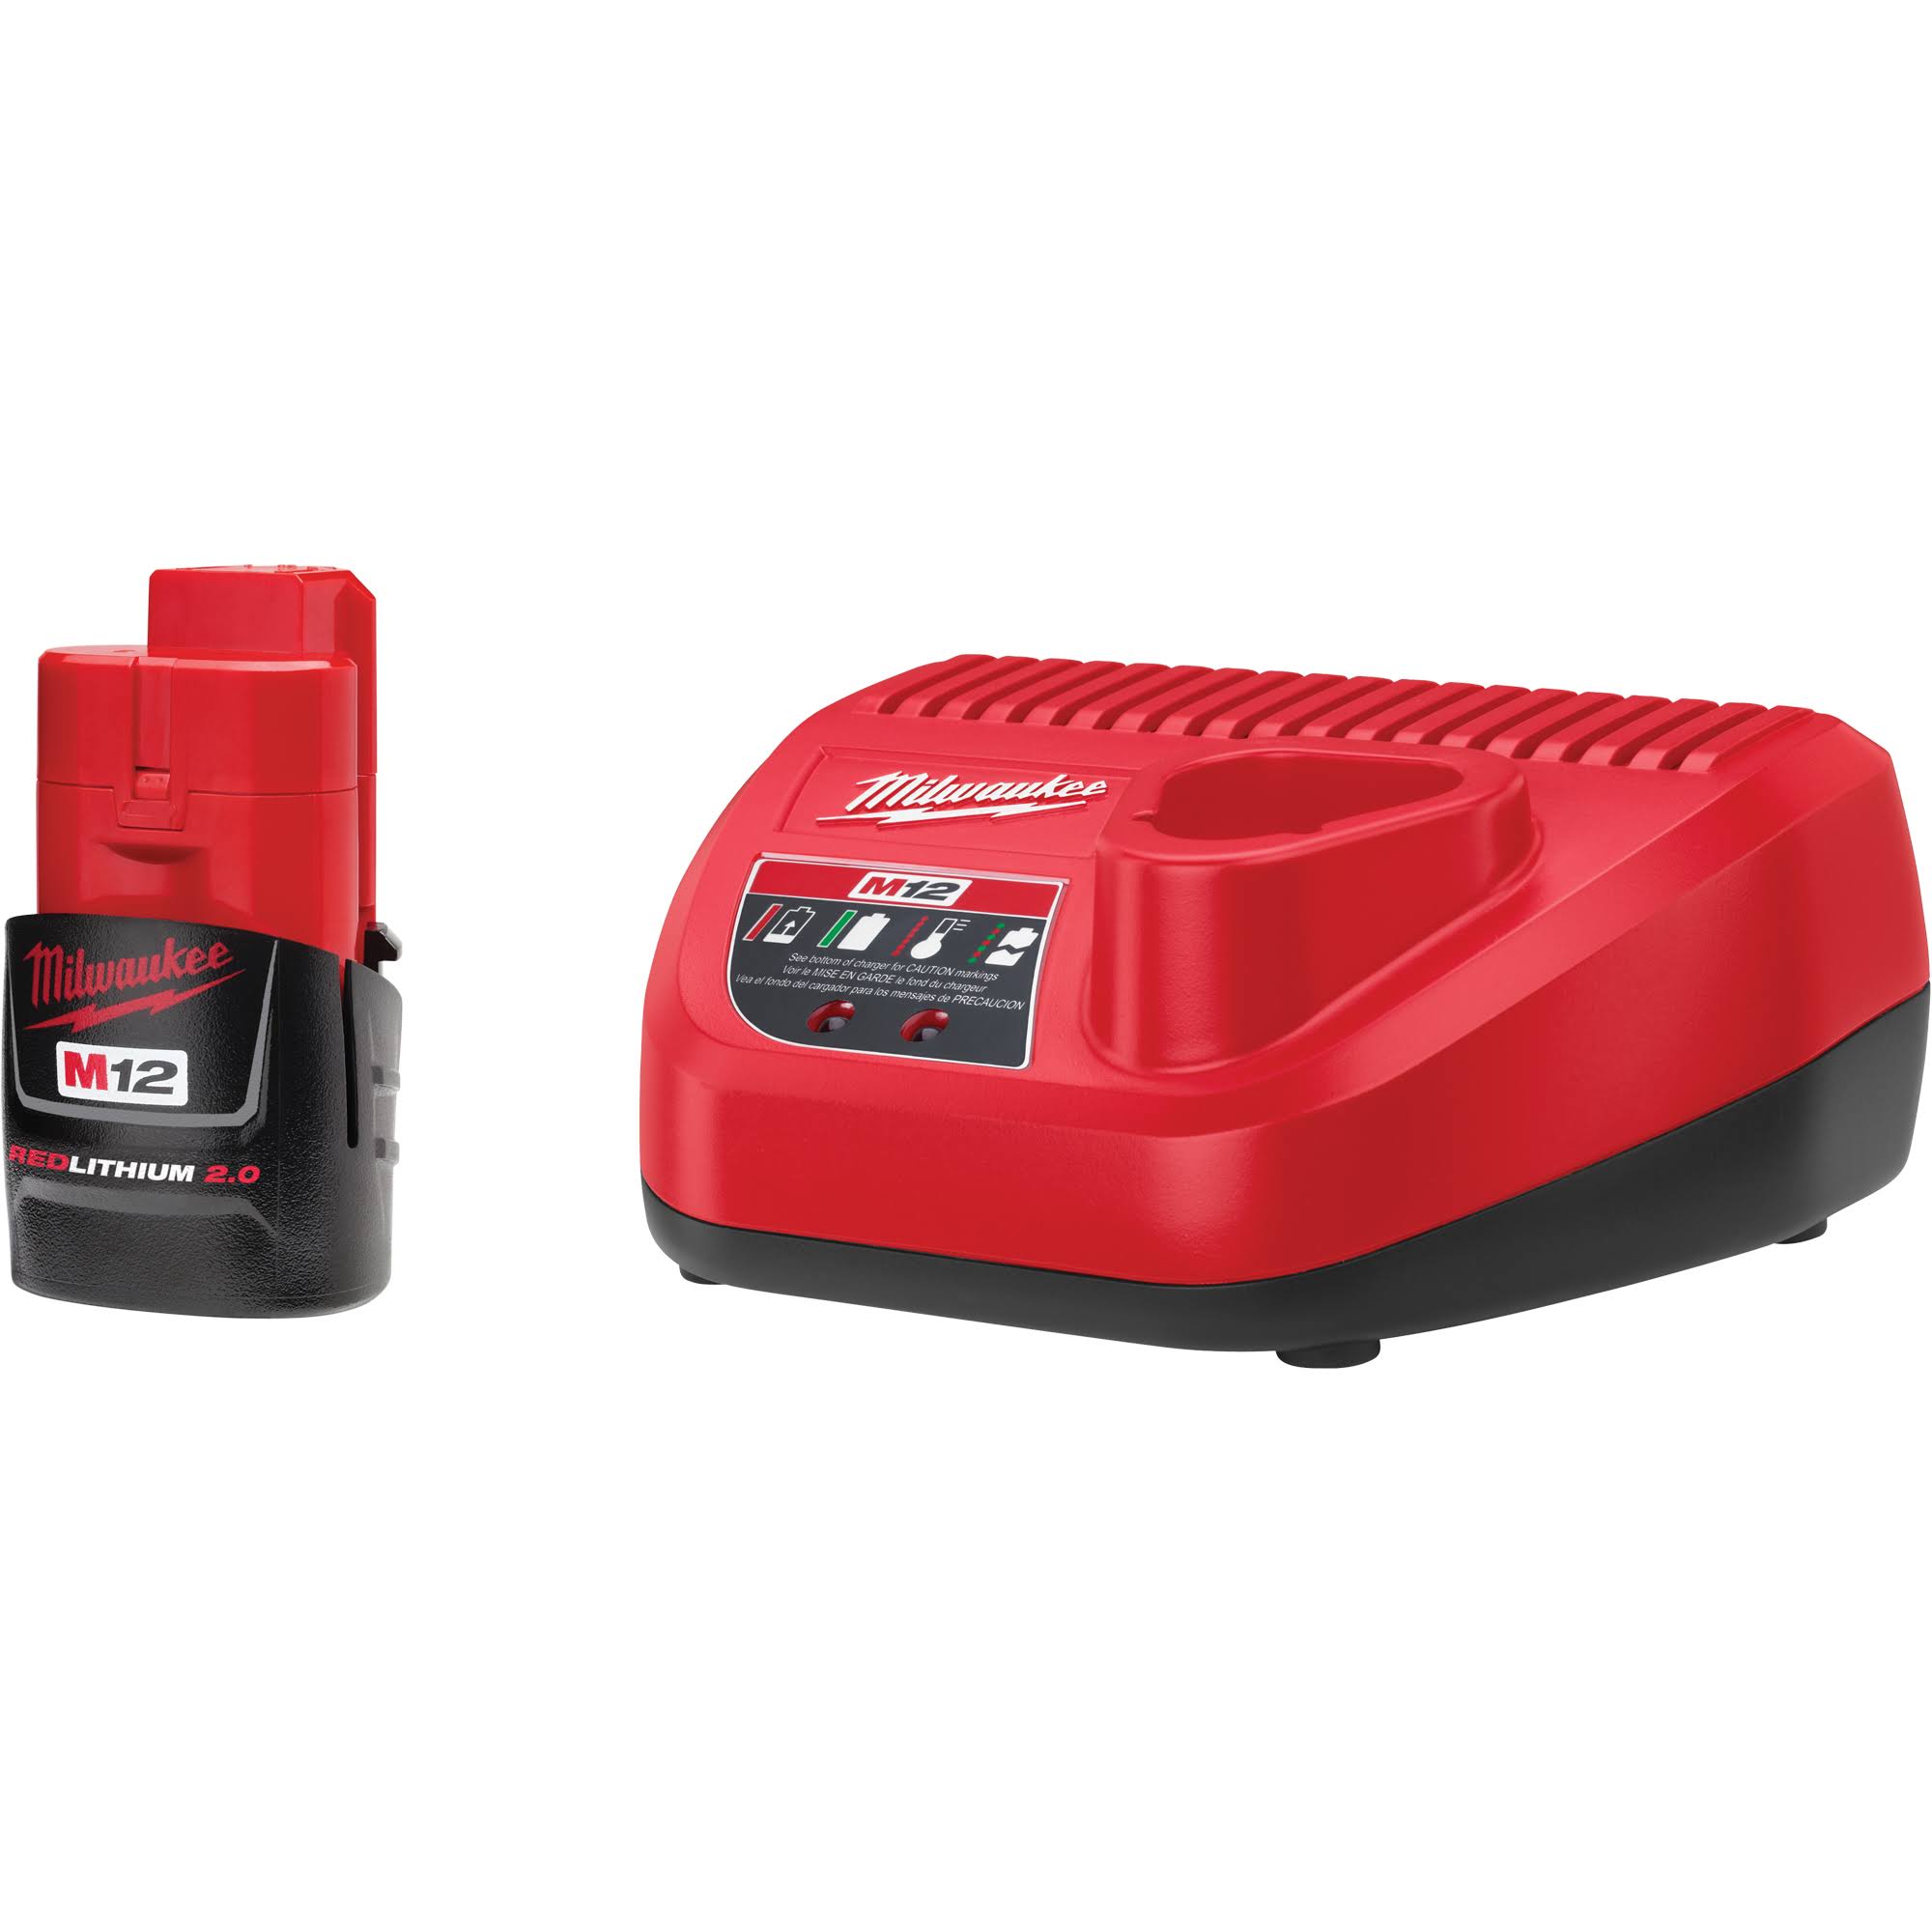 Milwaukee M12 Lithium Ion 2.0 Battery and Charger Starter Kit